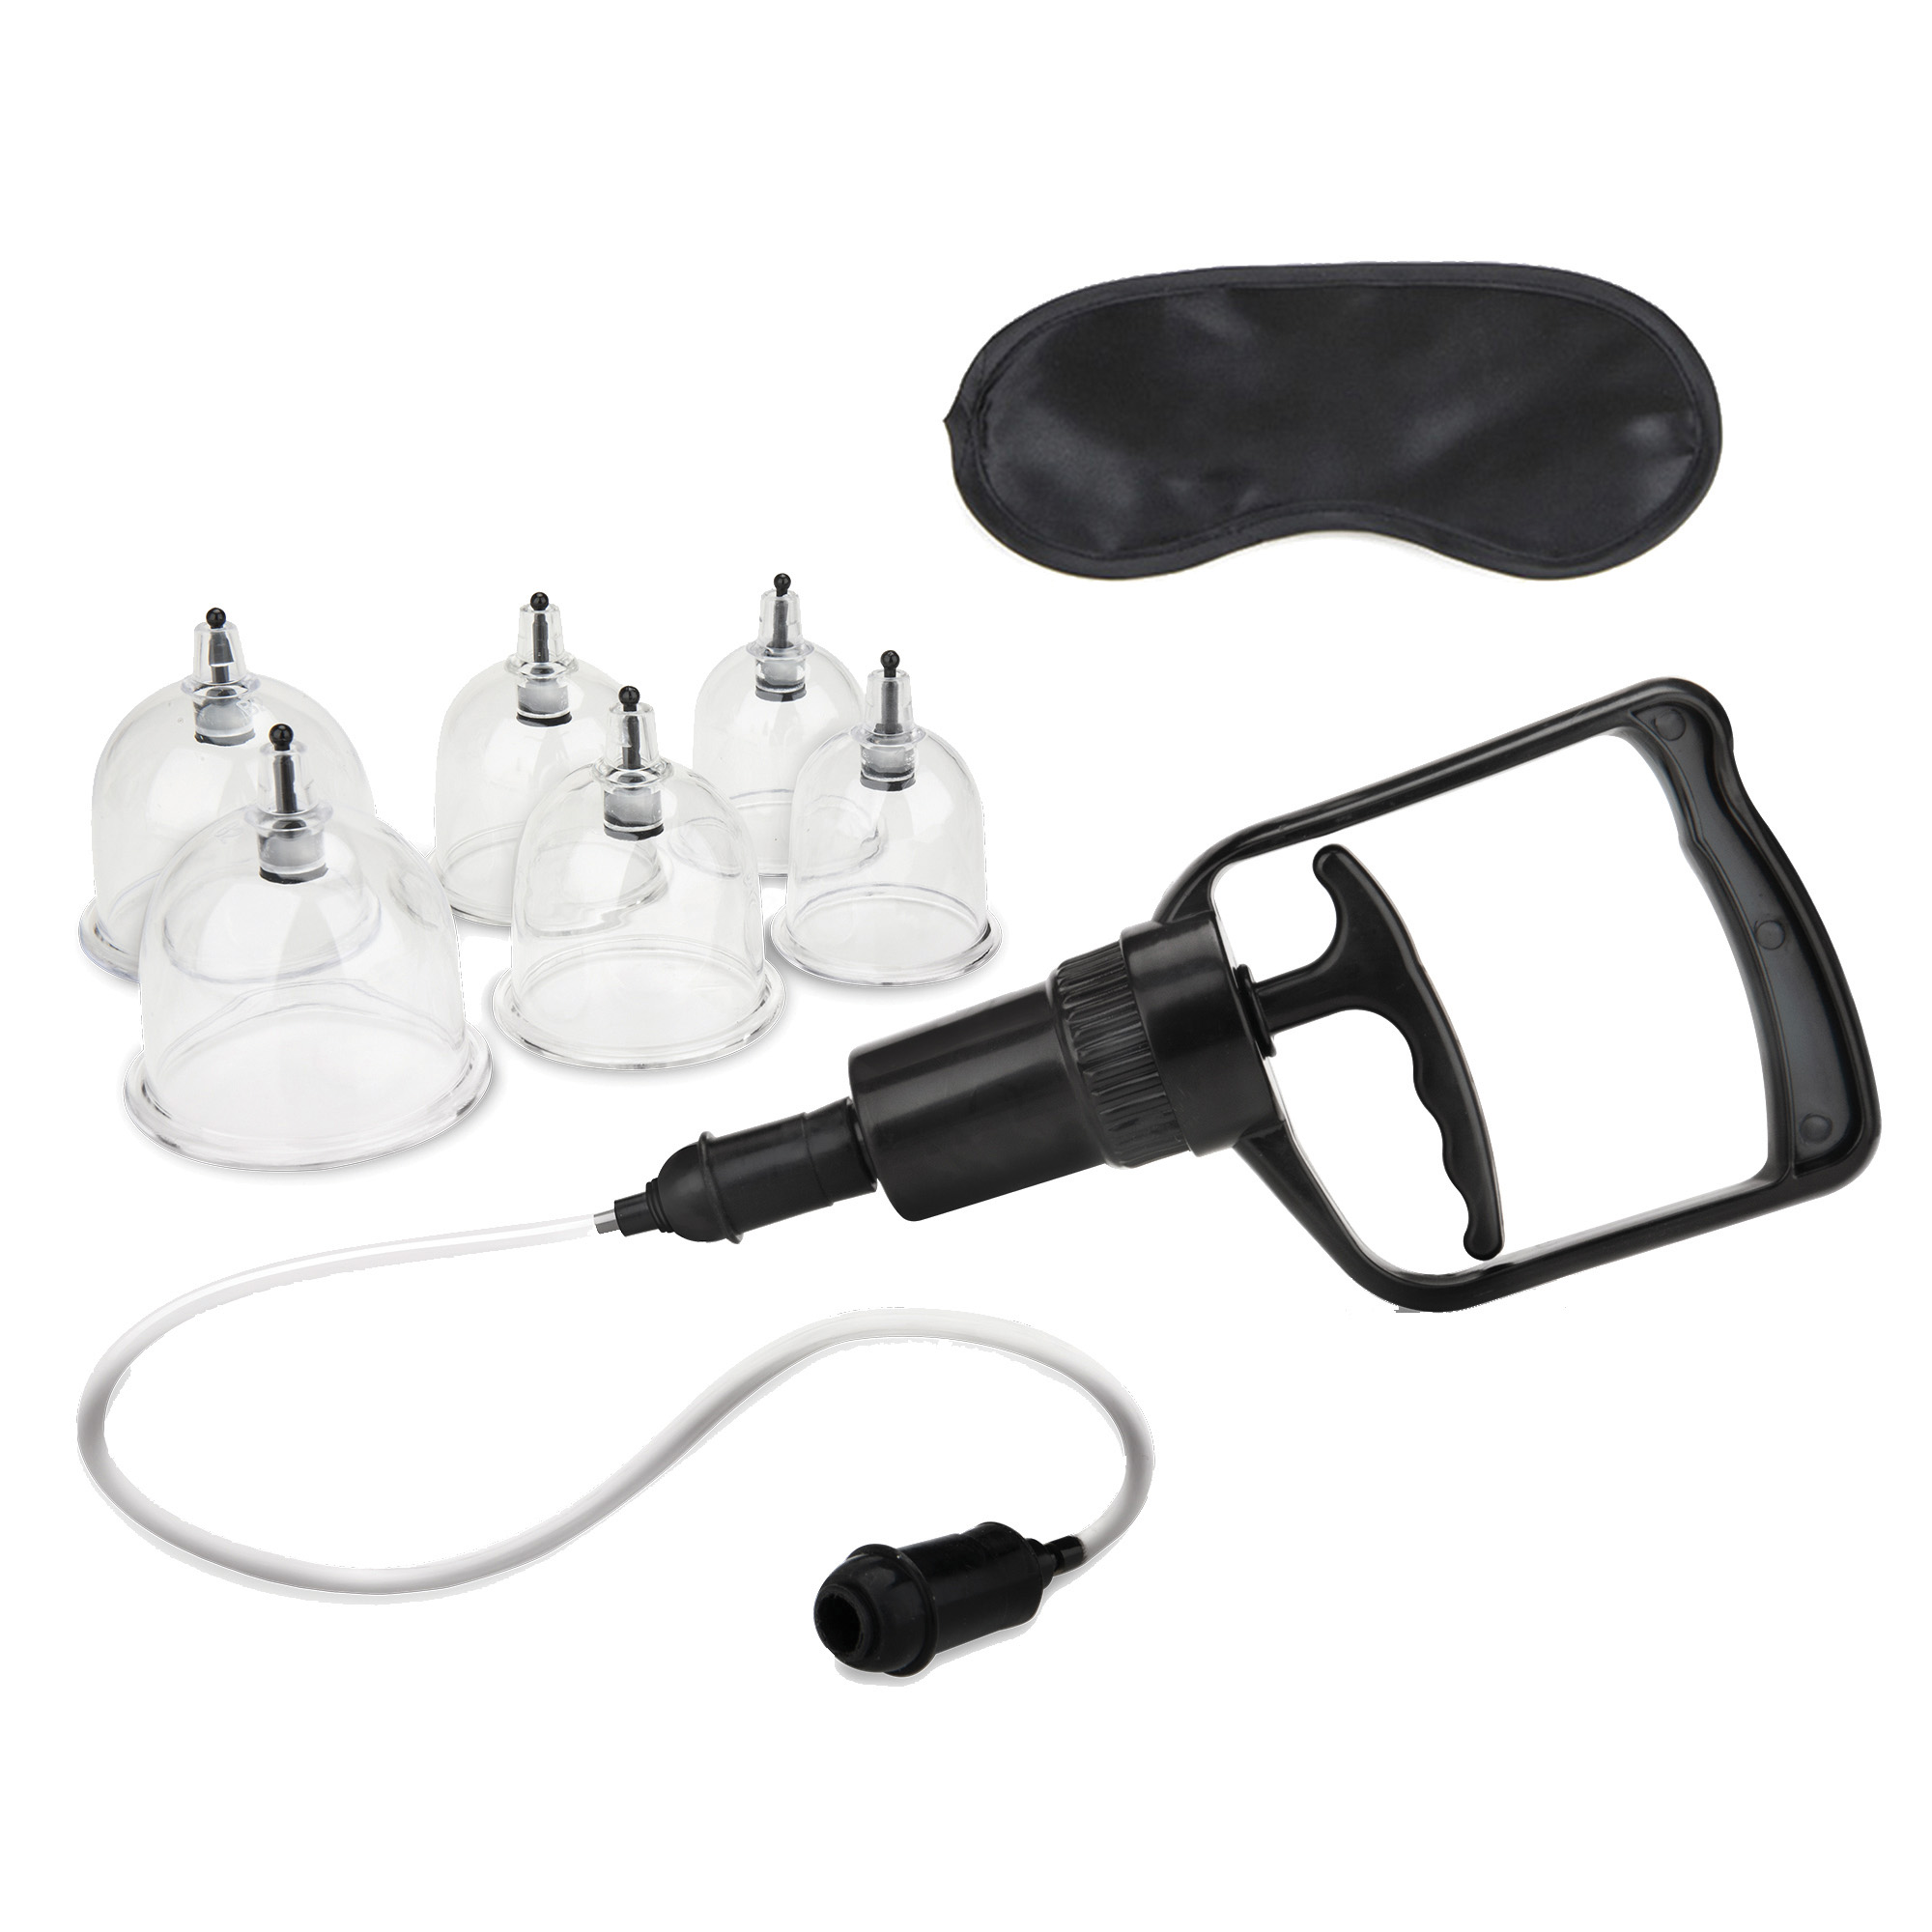 LUX FETISH Erotic Suction Cupping Set